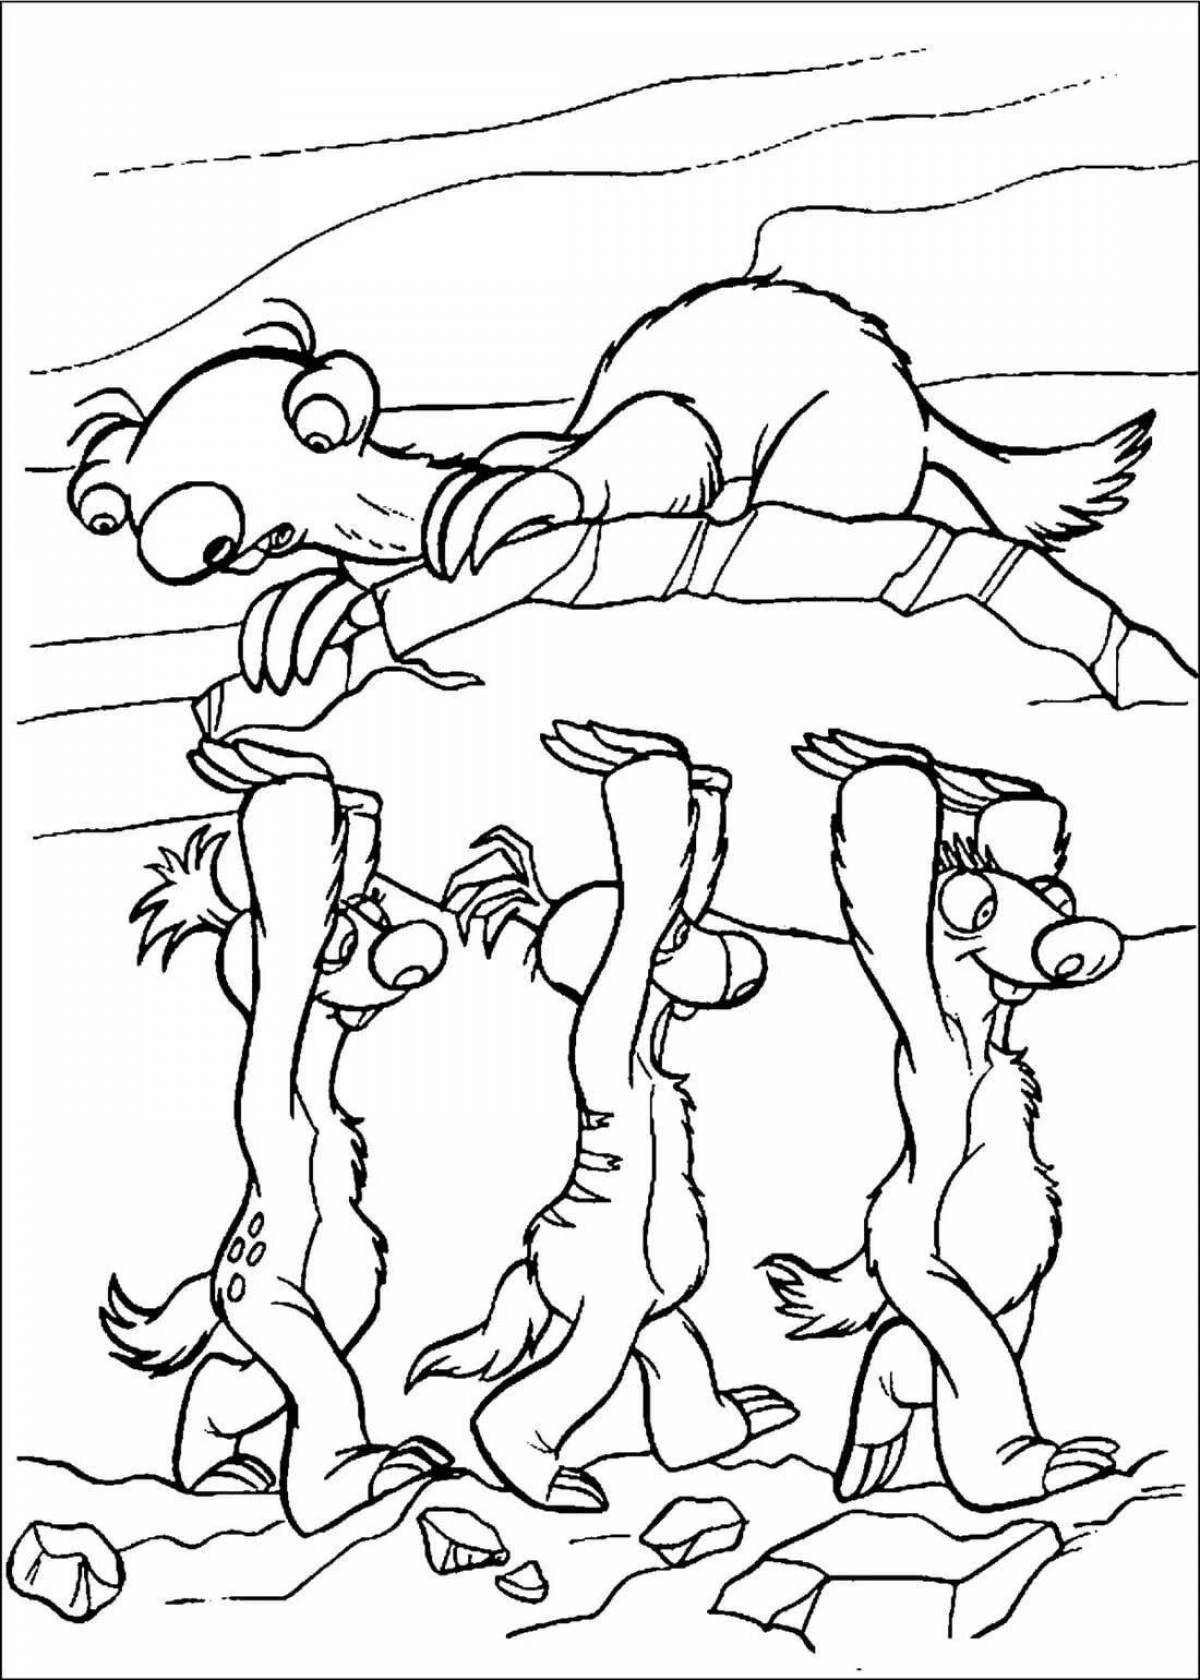 Playful ice age coloring page